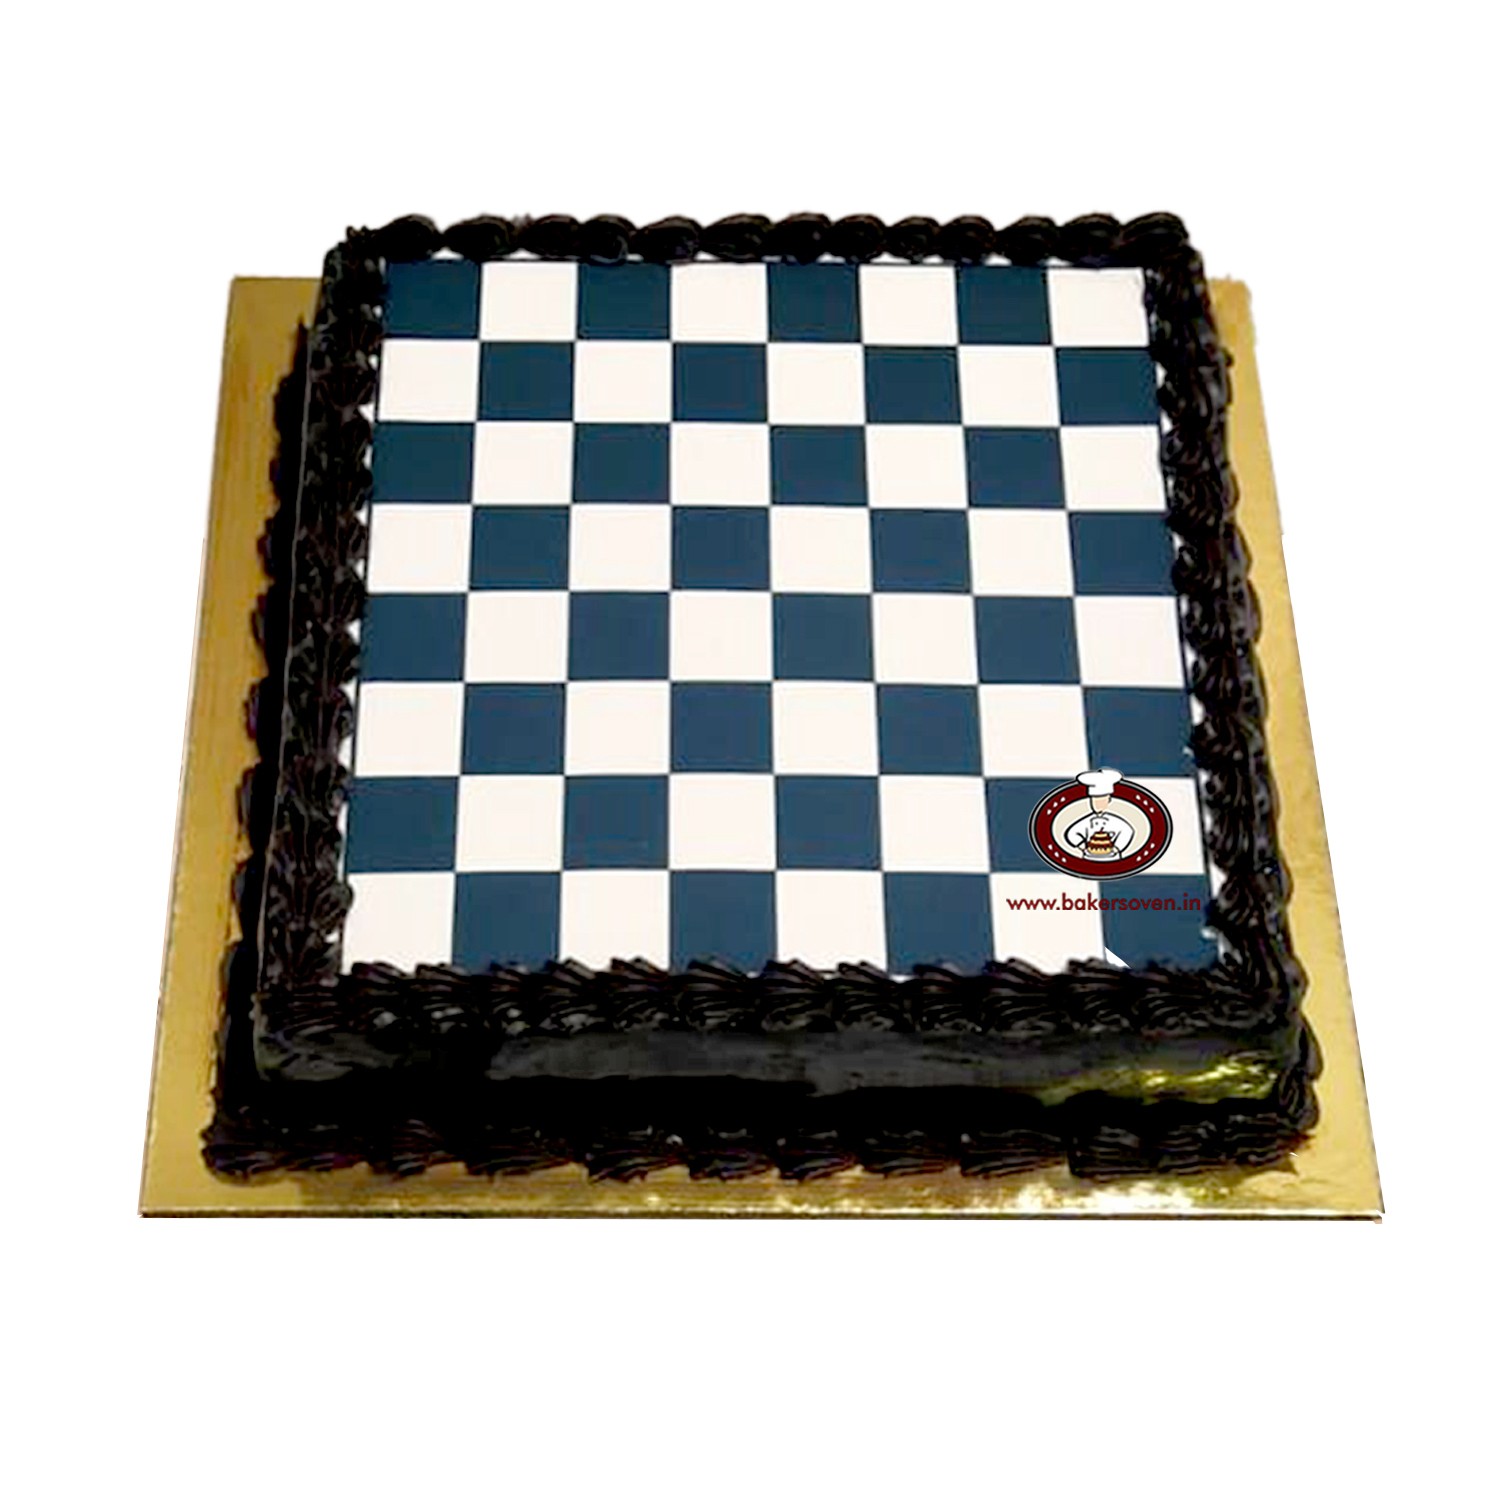 Chess Board Cake | Chess board cake, complete with chocolate… | Flickr